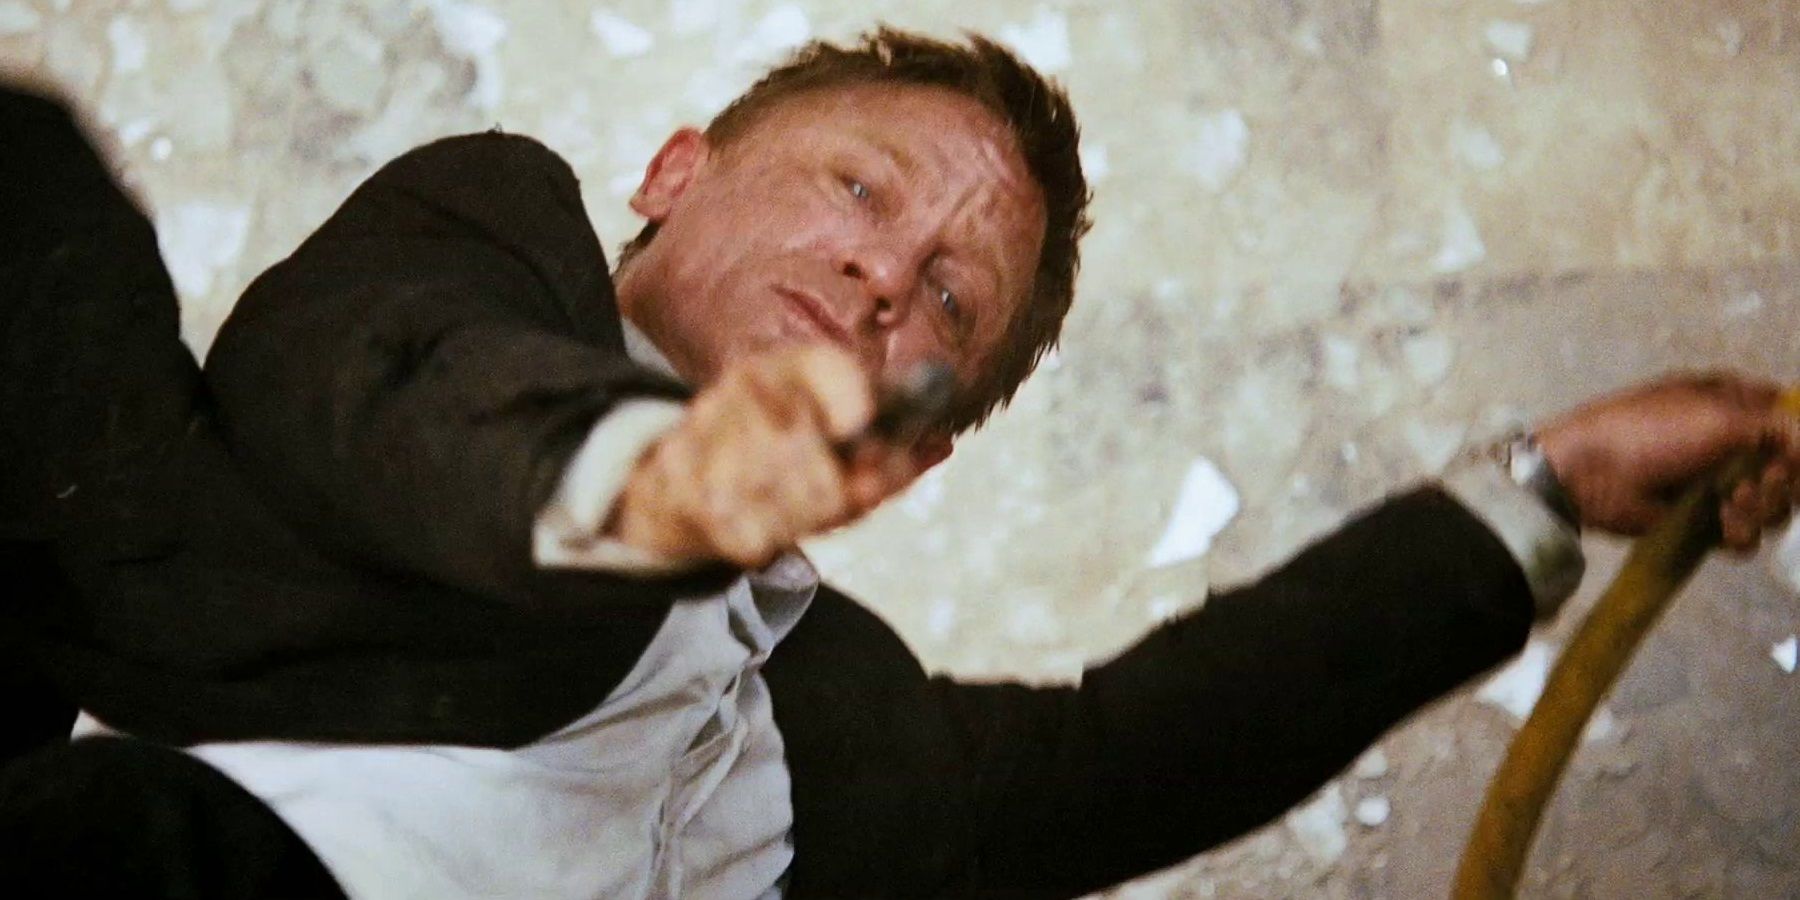 Bond hangs from scaffolding in the opening scene of Quantum of Solace